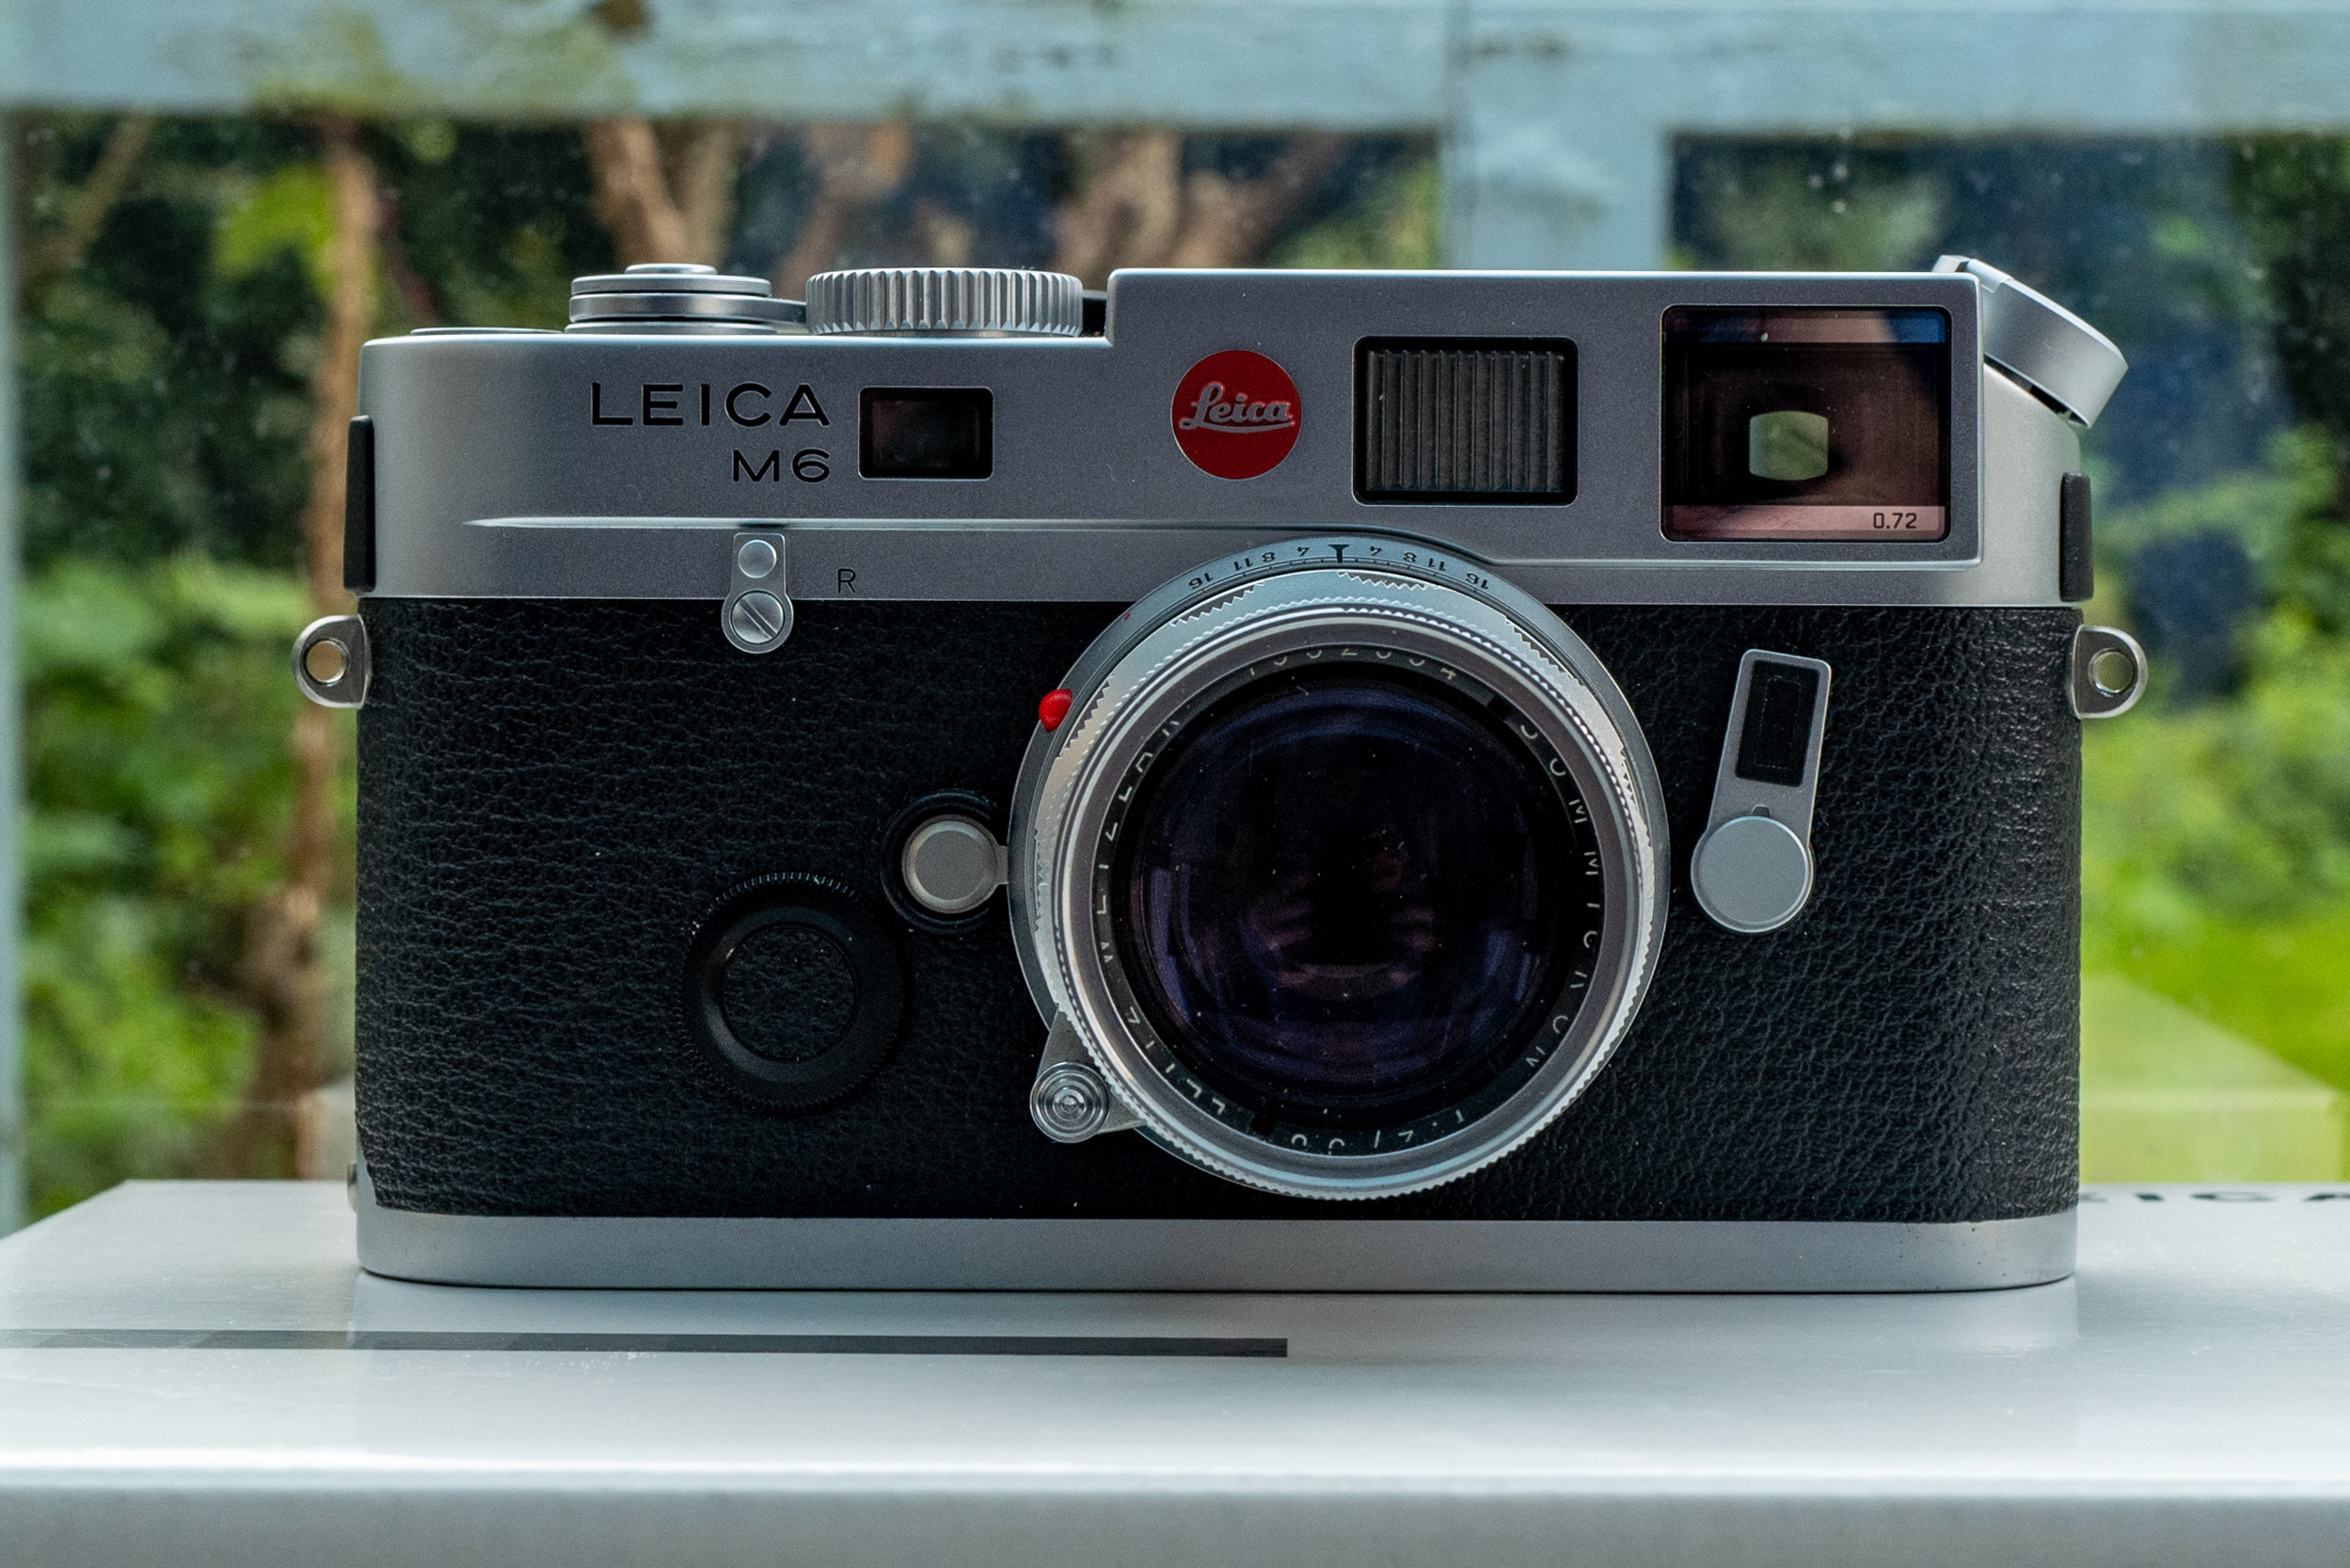 A minit-condition camera after 22 years. Note the 0.72 engraving in the rangefinder window and the prominent knurled shutter-speed dial which is easy to operate with the forefinger while holding the camera to the eye...